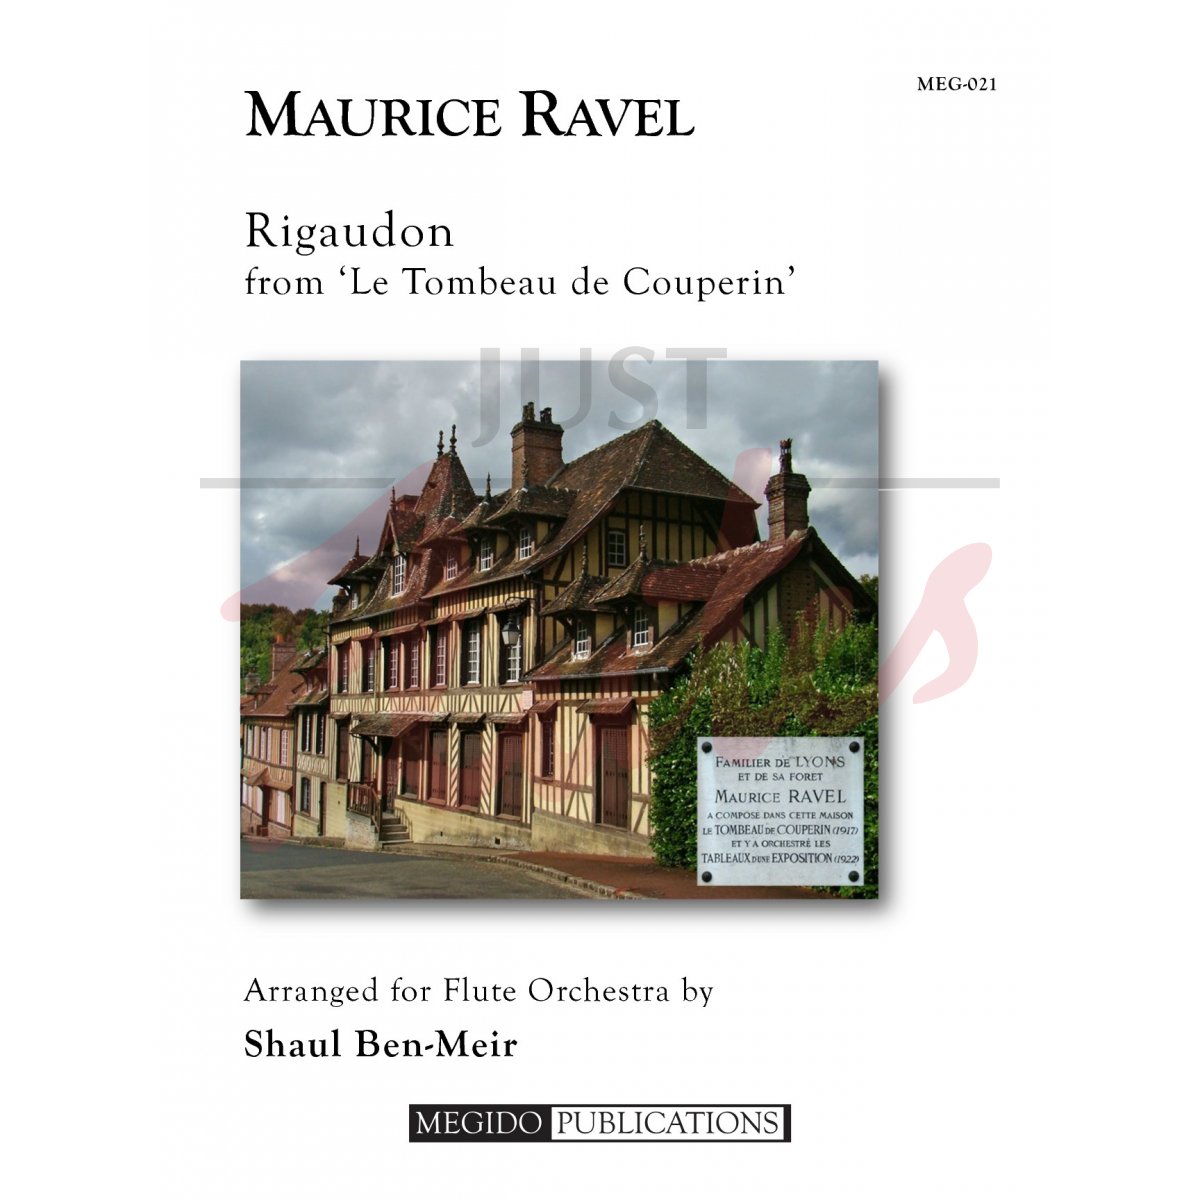 Rigaudon from Le Tombeau de Couperin